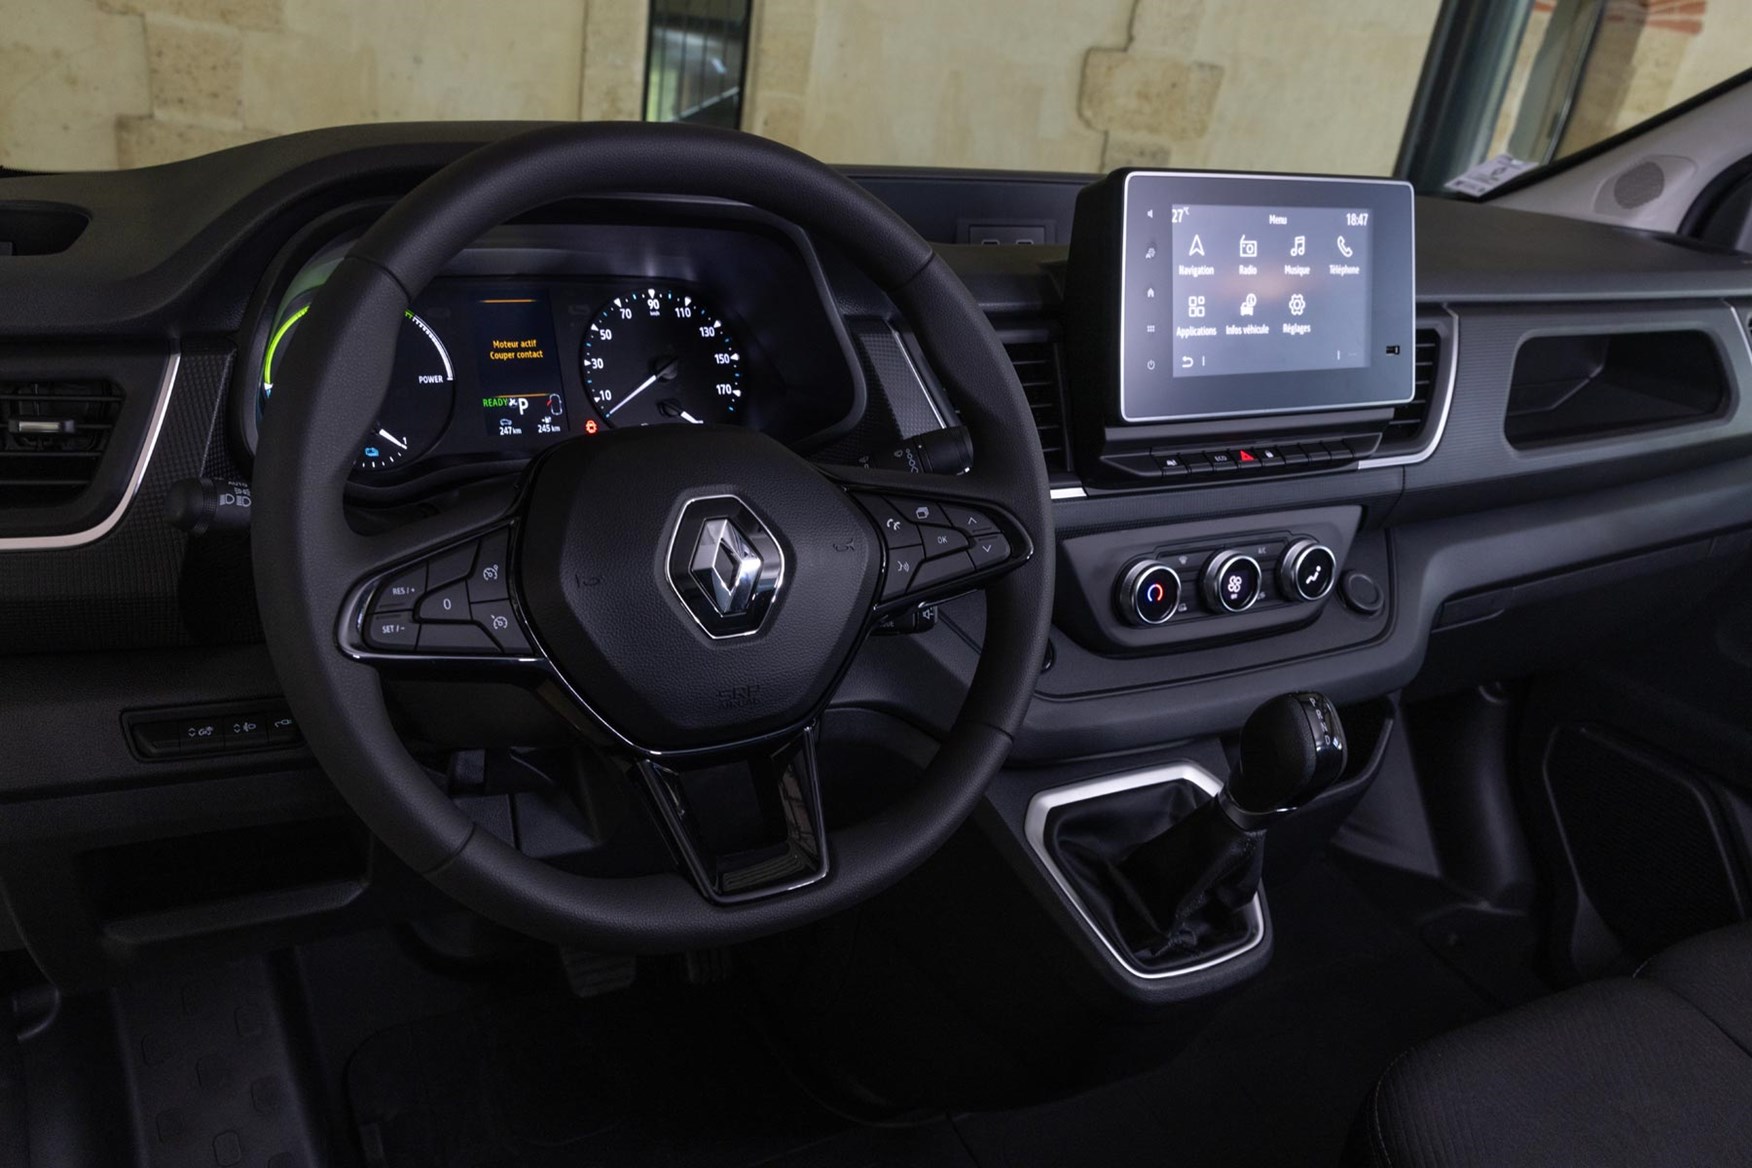 The Renault Trafic E-Tech's cabin borrows heavily from its passenger car relatives.